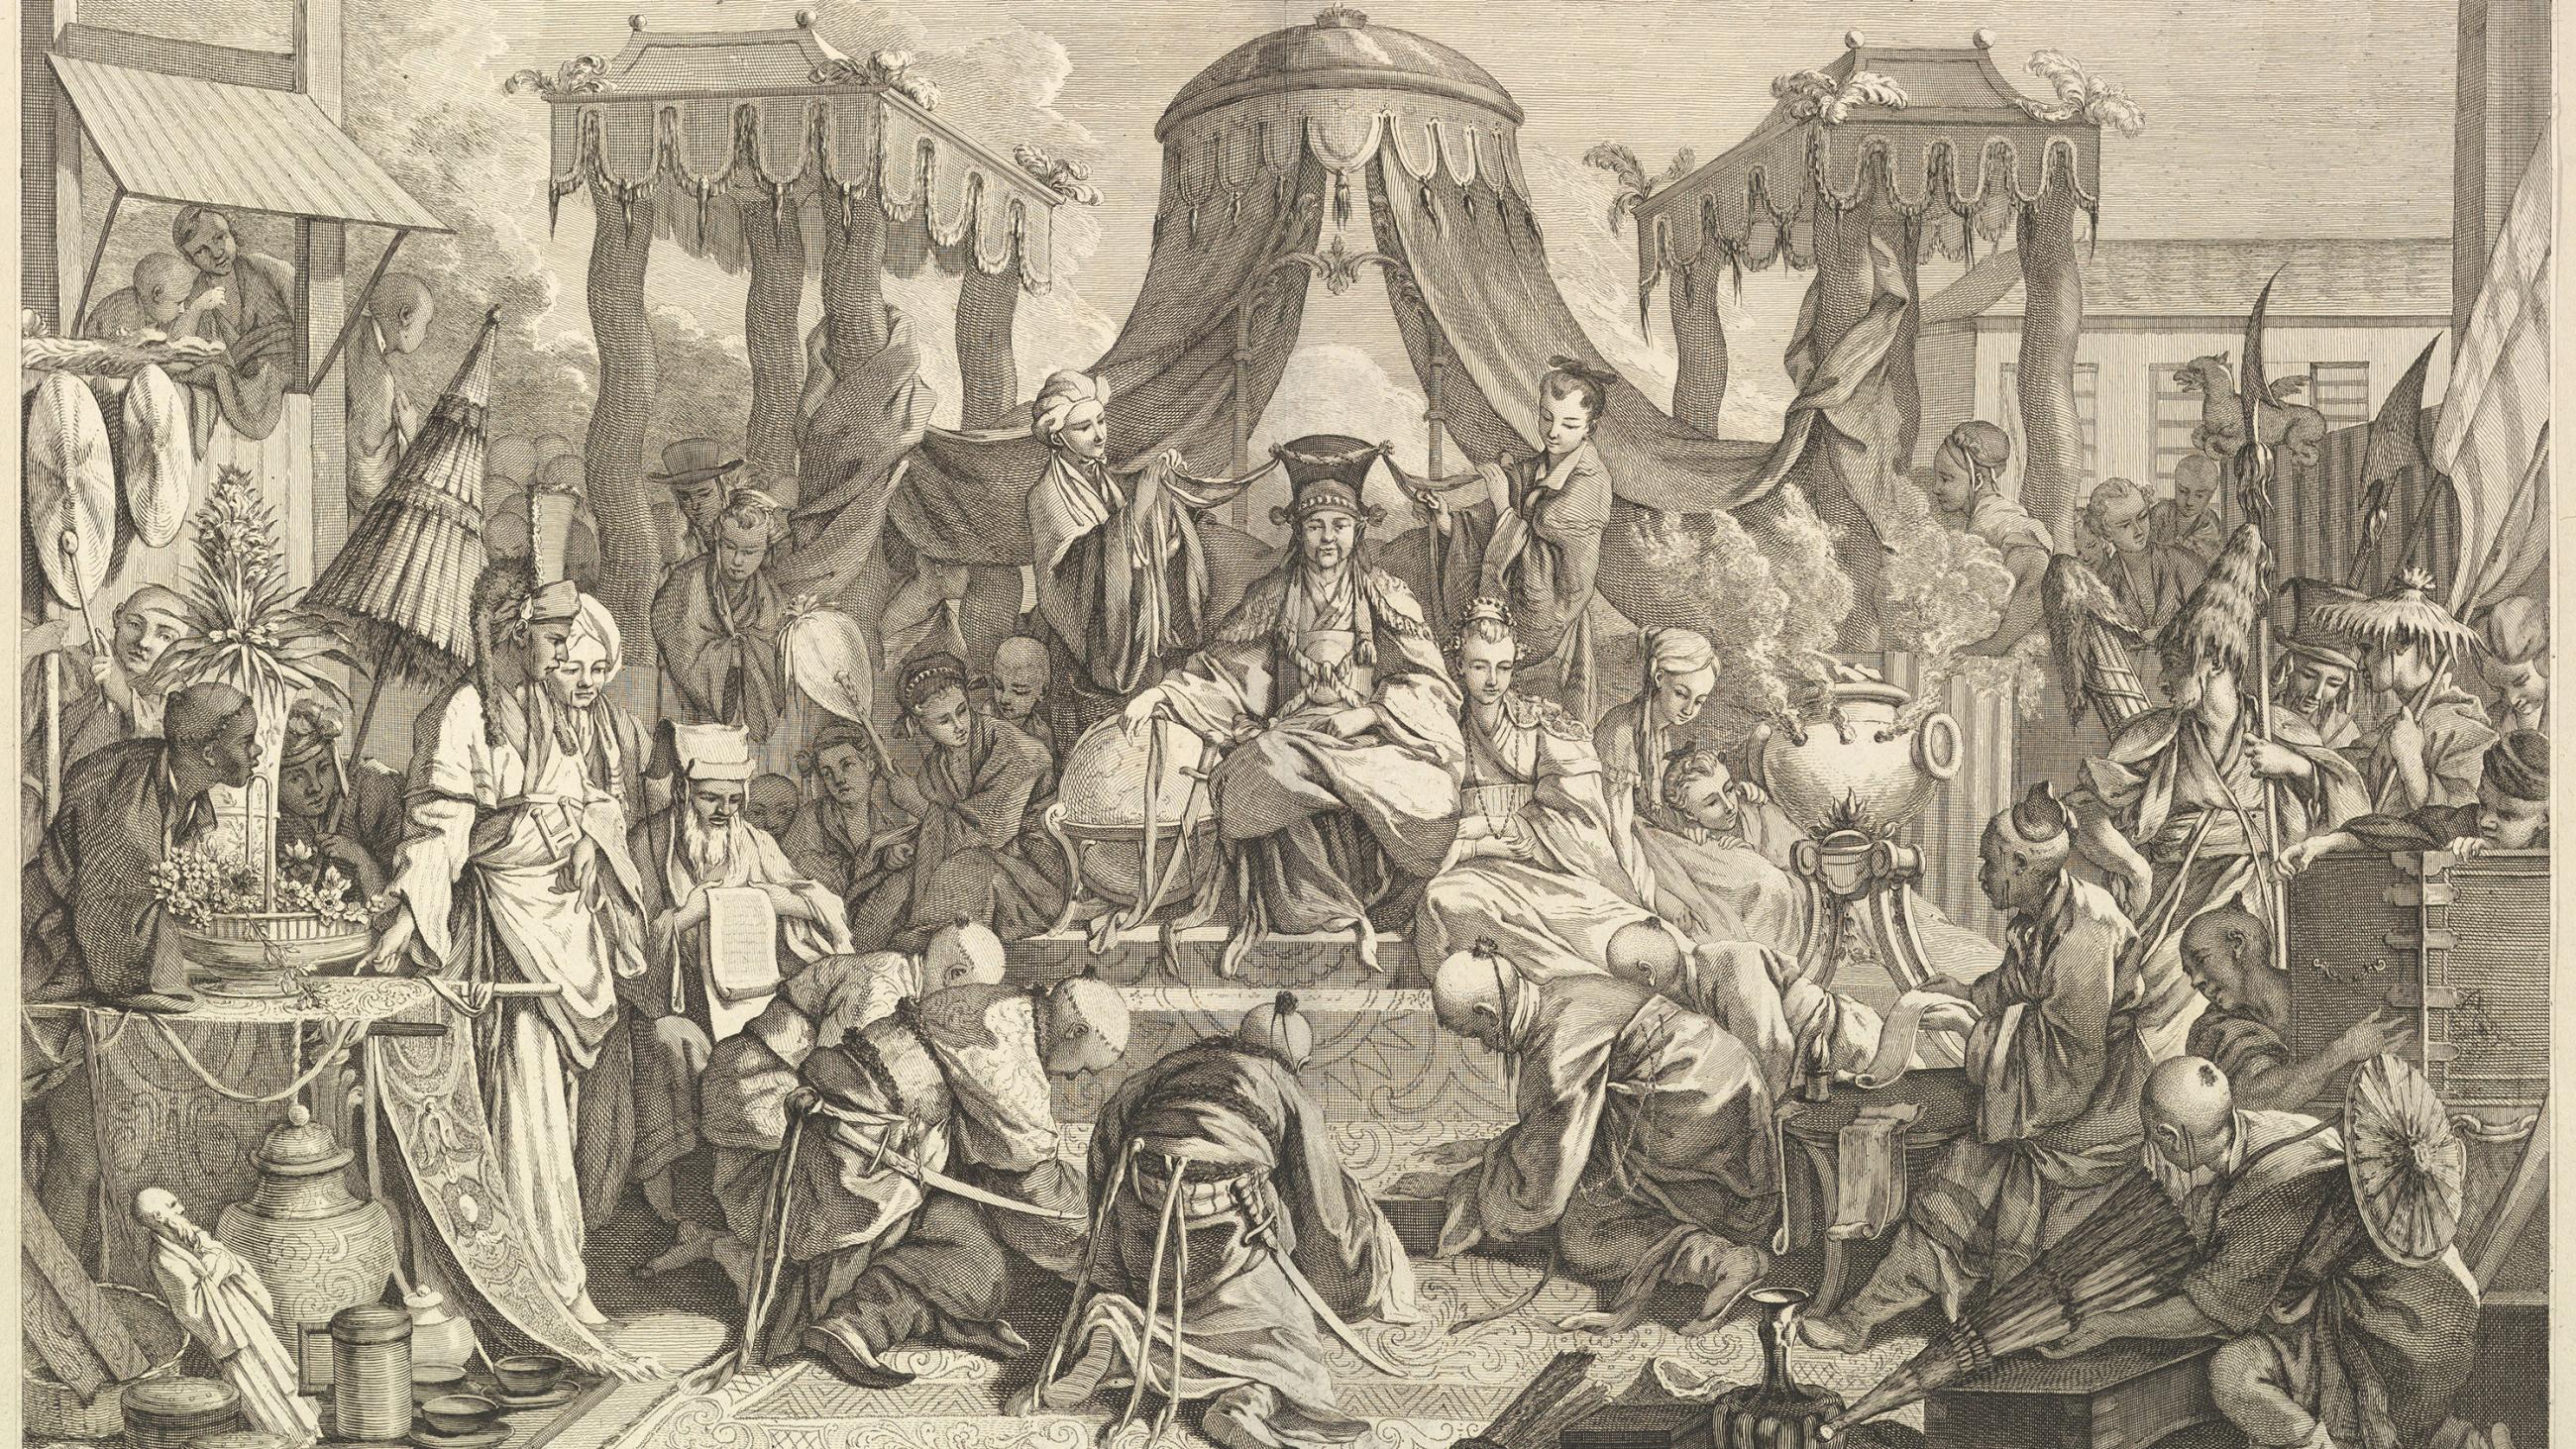 The engraving shows an elaborate court scene in ancient China with lots of courtiers surrounding the emperor and a group of people paying tribute, bowing at his feet. 